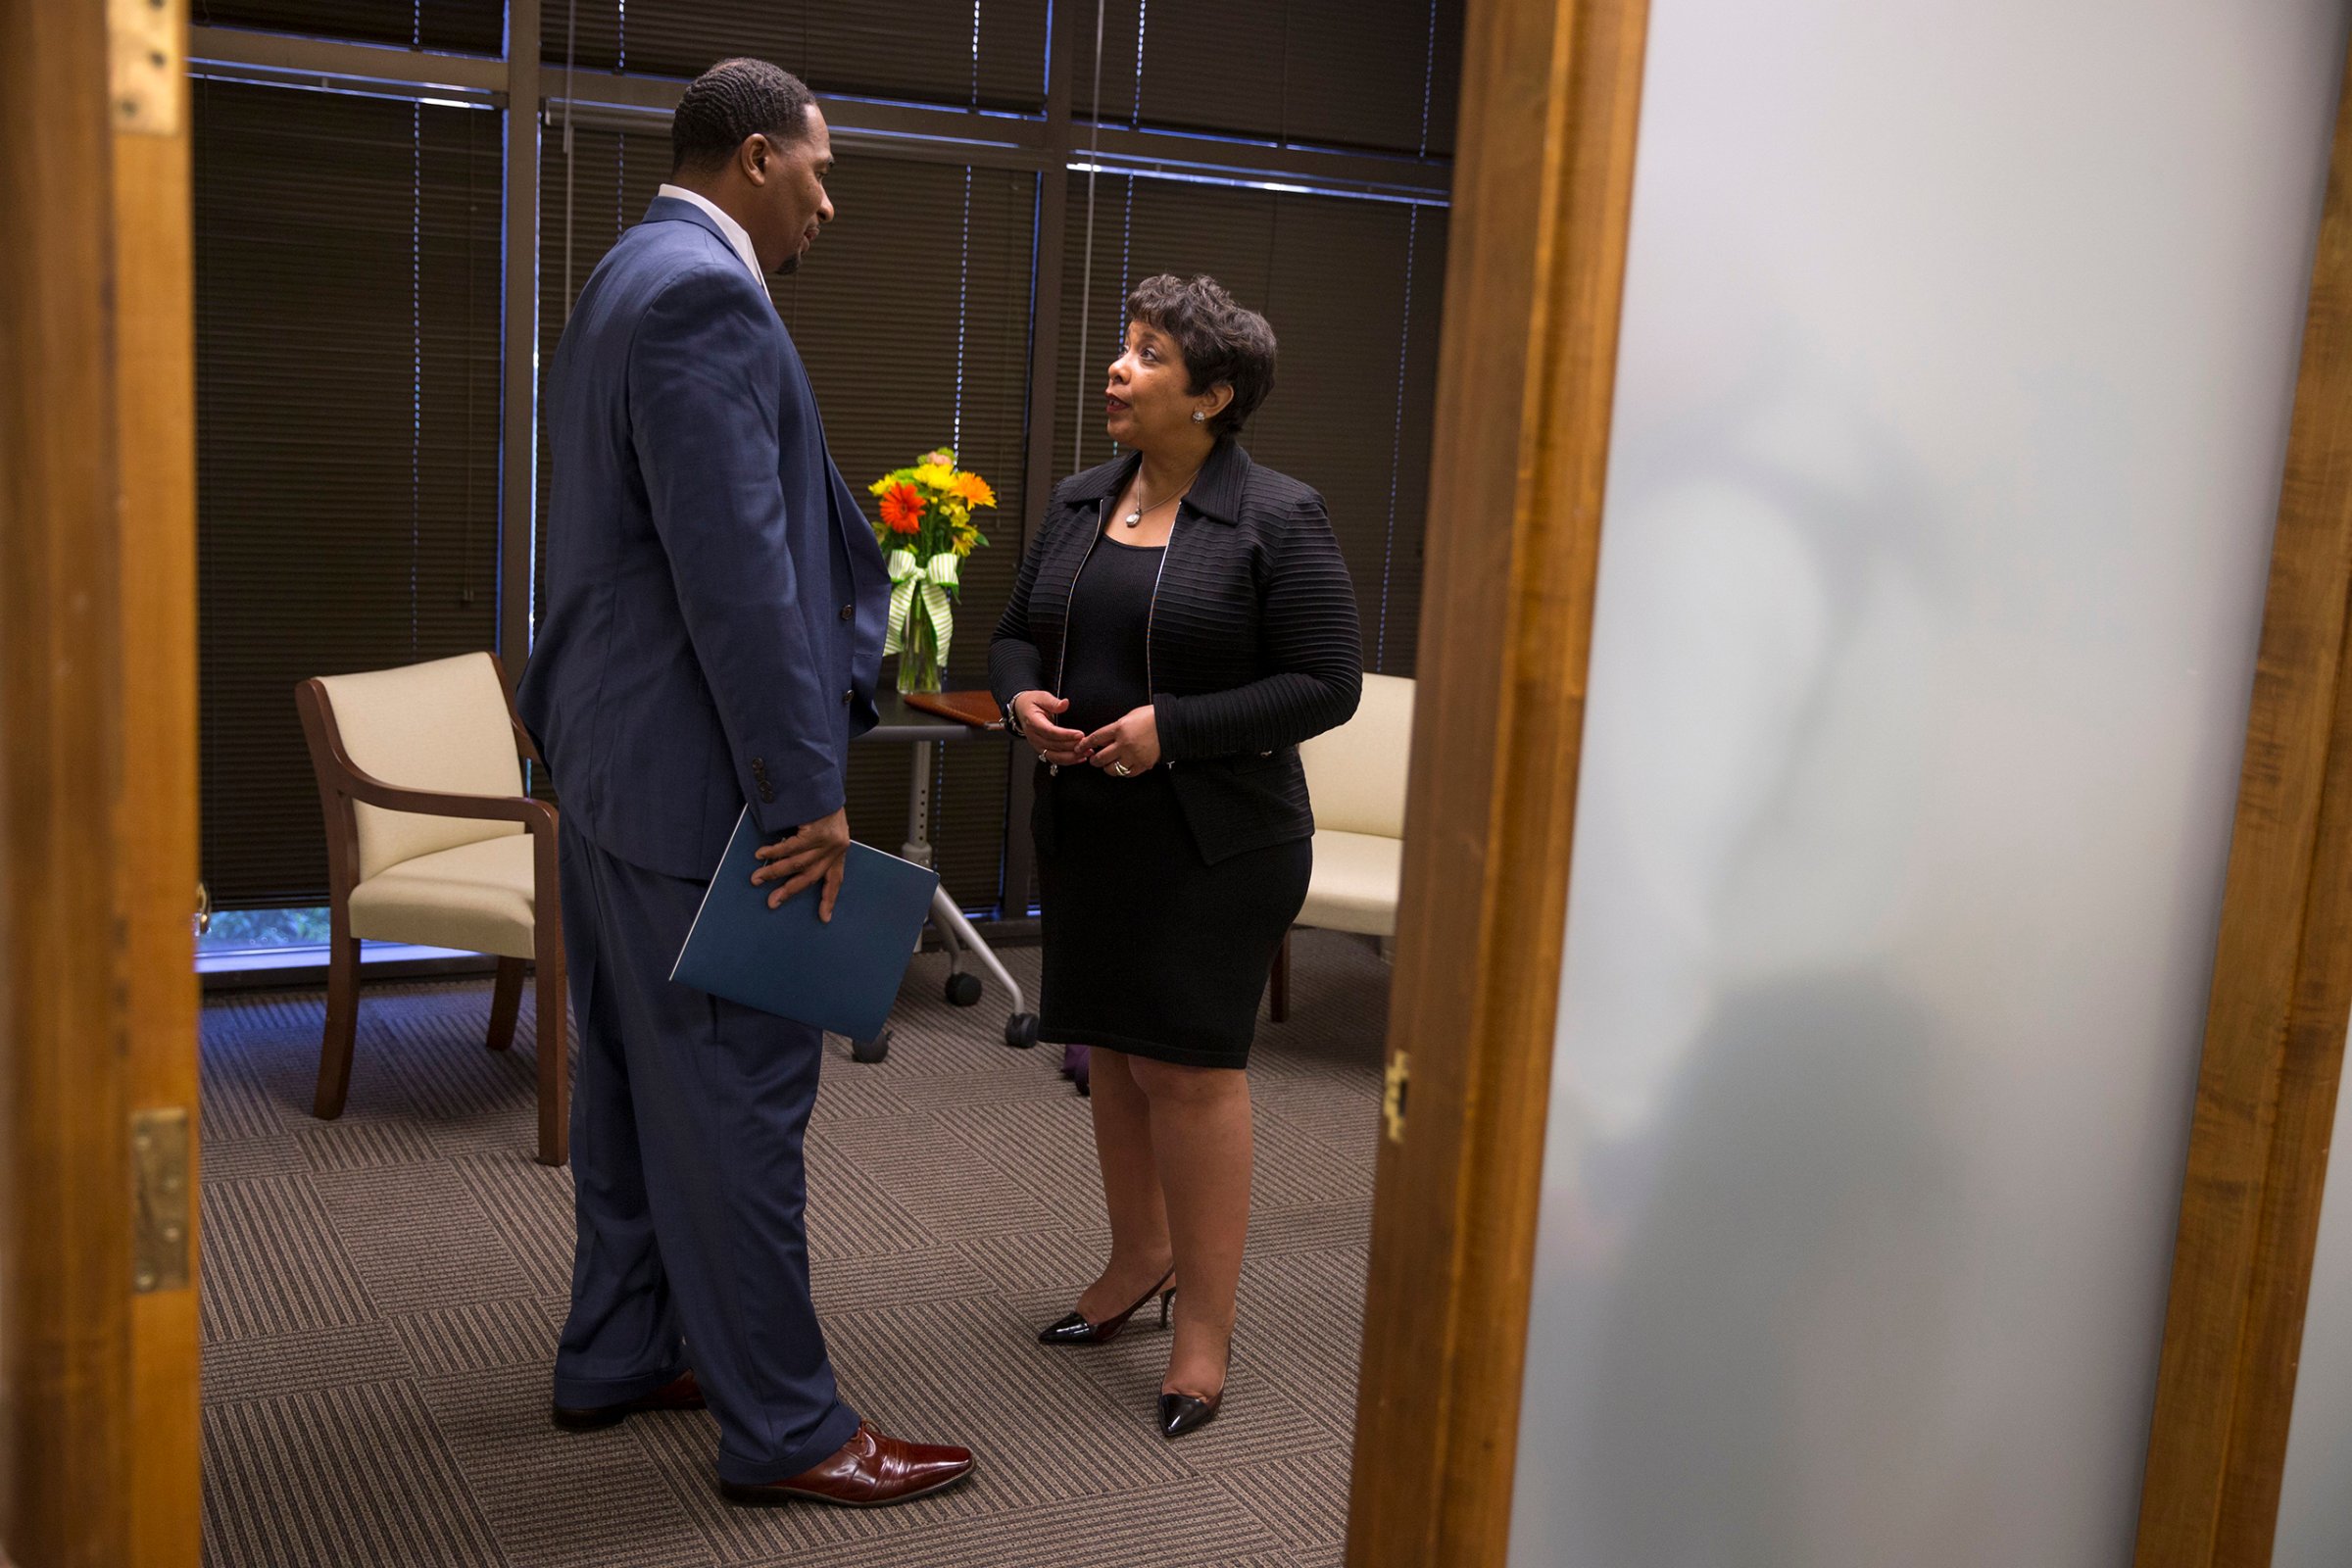 Attorney General Loretta Lynch, right, speaks with Clarence Aaron about his experiences after his release from federal prison during an event to highlight policies that aim to reduce barriers for formerly incarcerated individuals in Mobile, Ala., April 29, 2016.